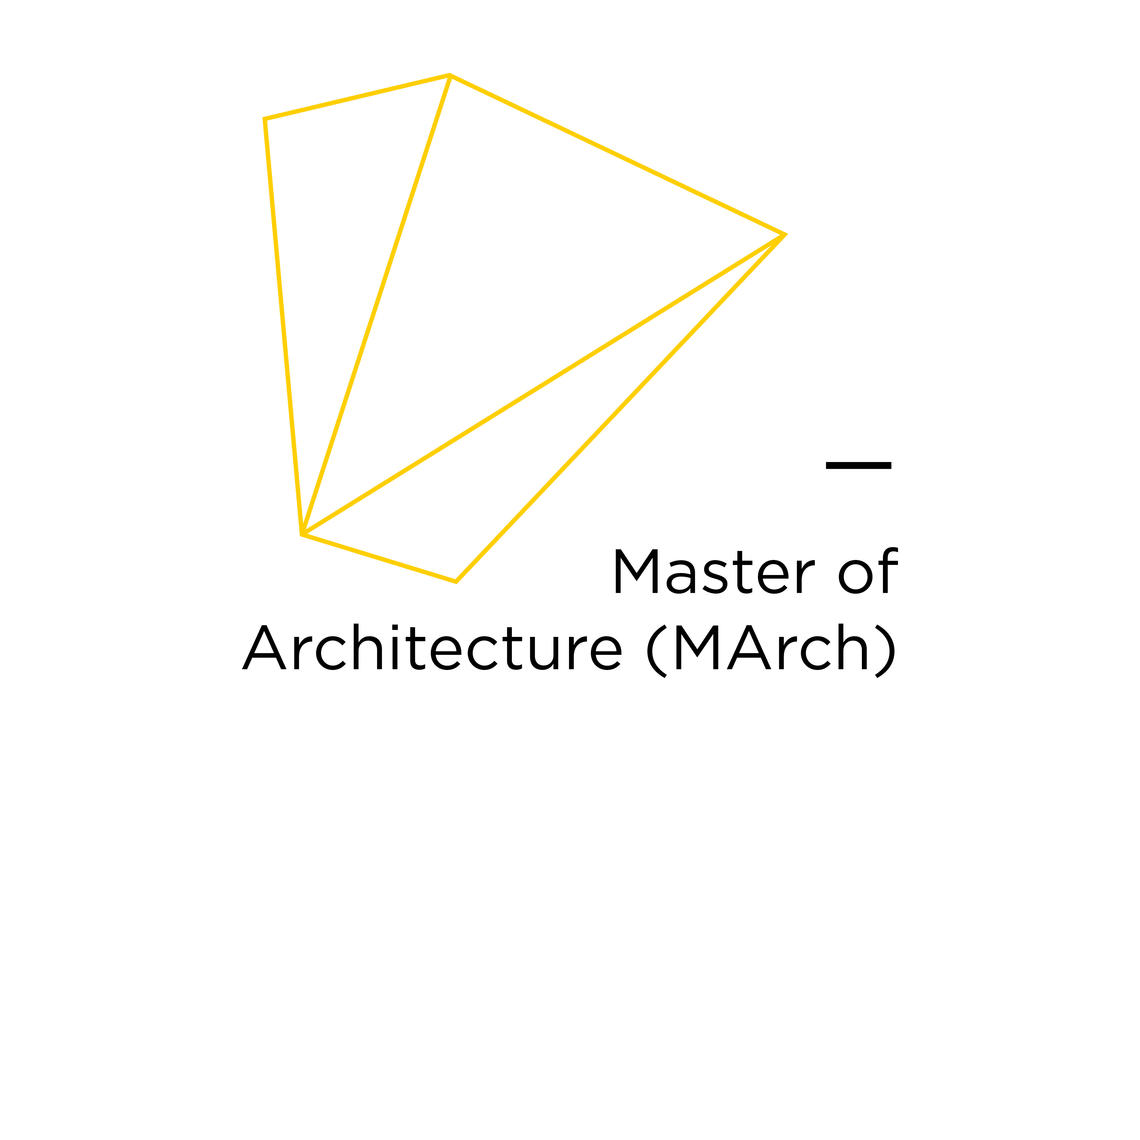 Master of Architecture (MArch)